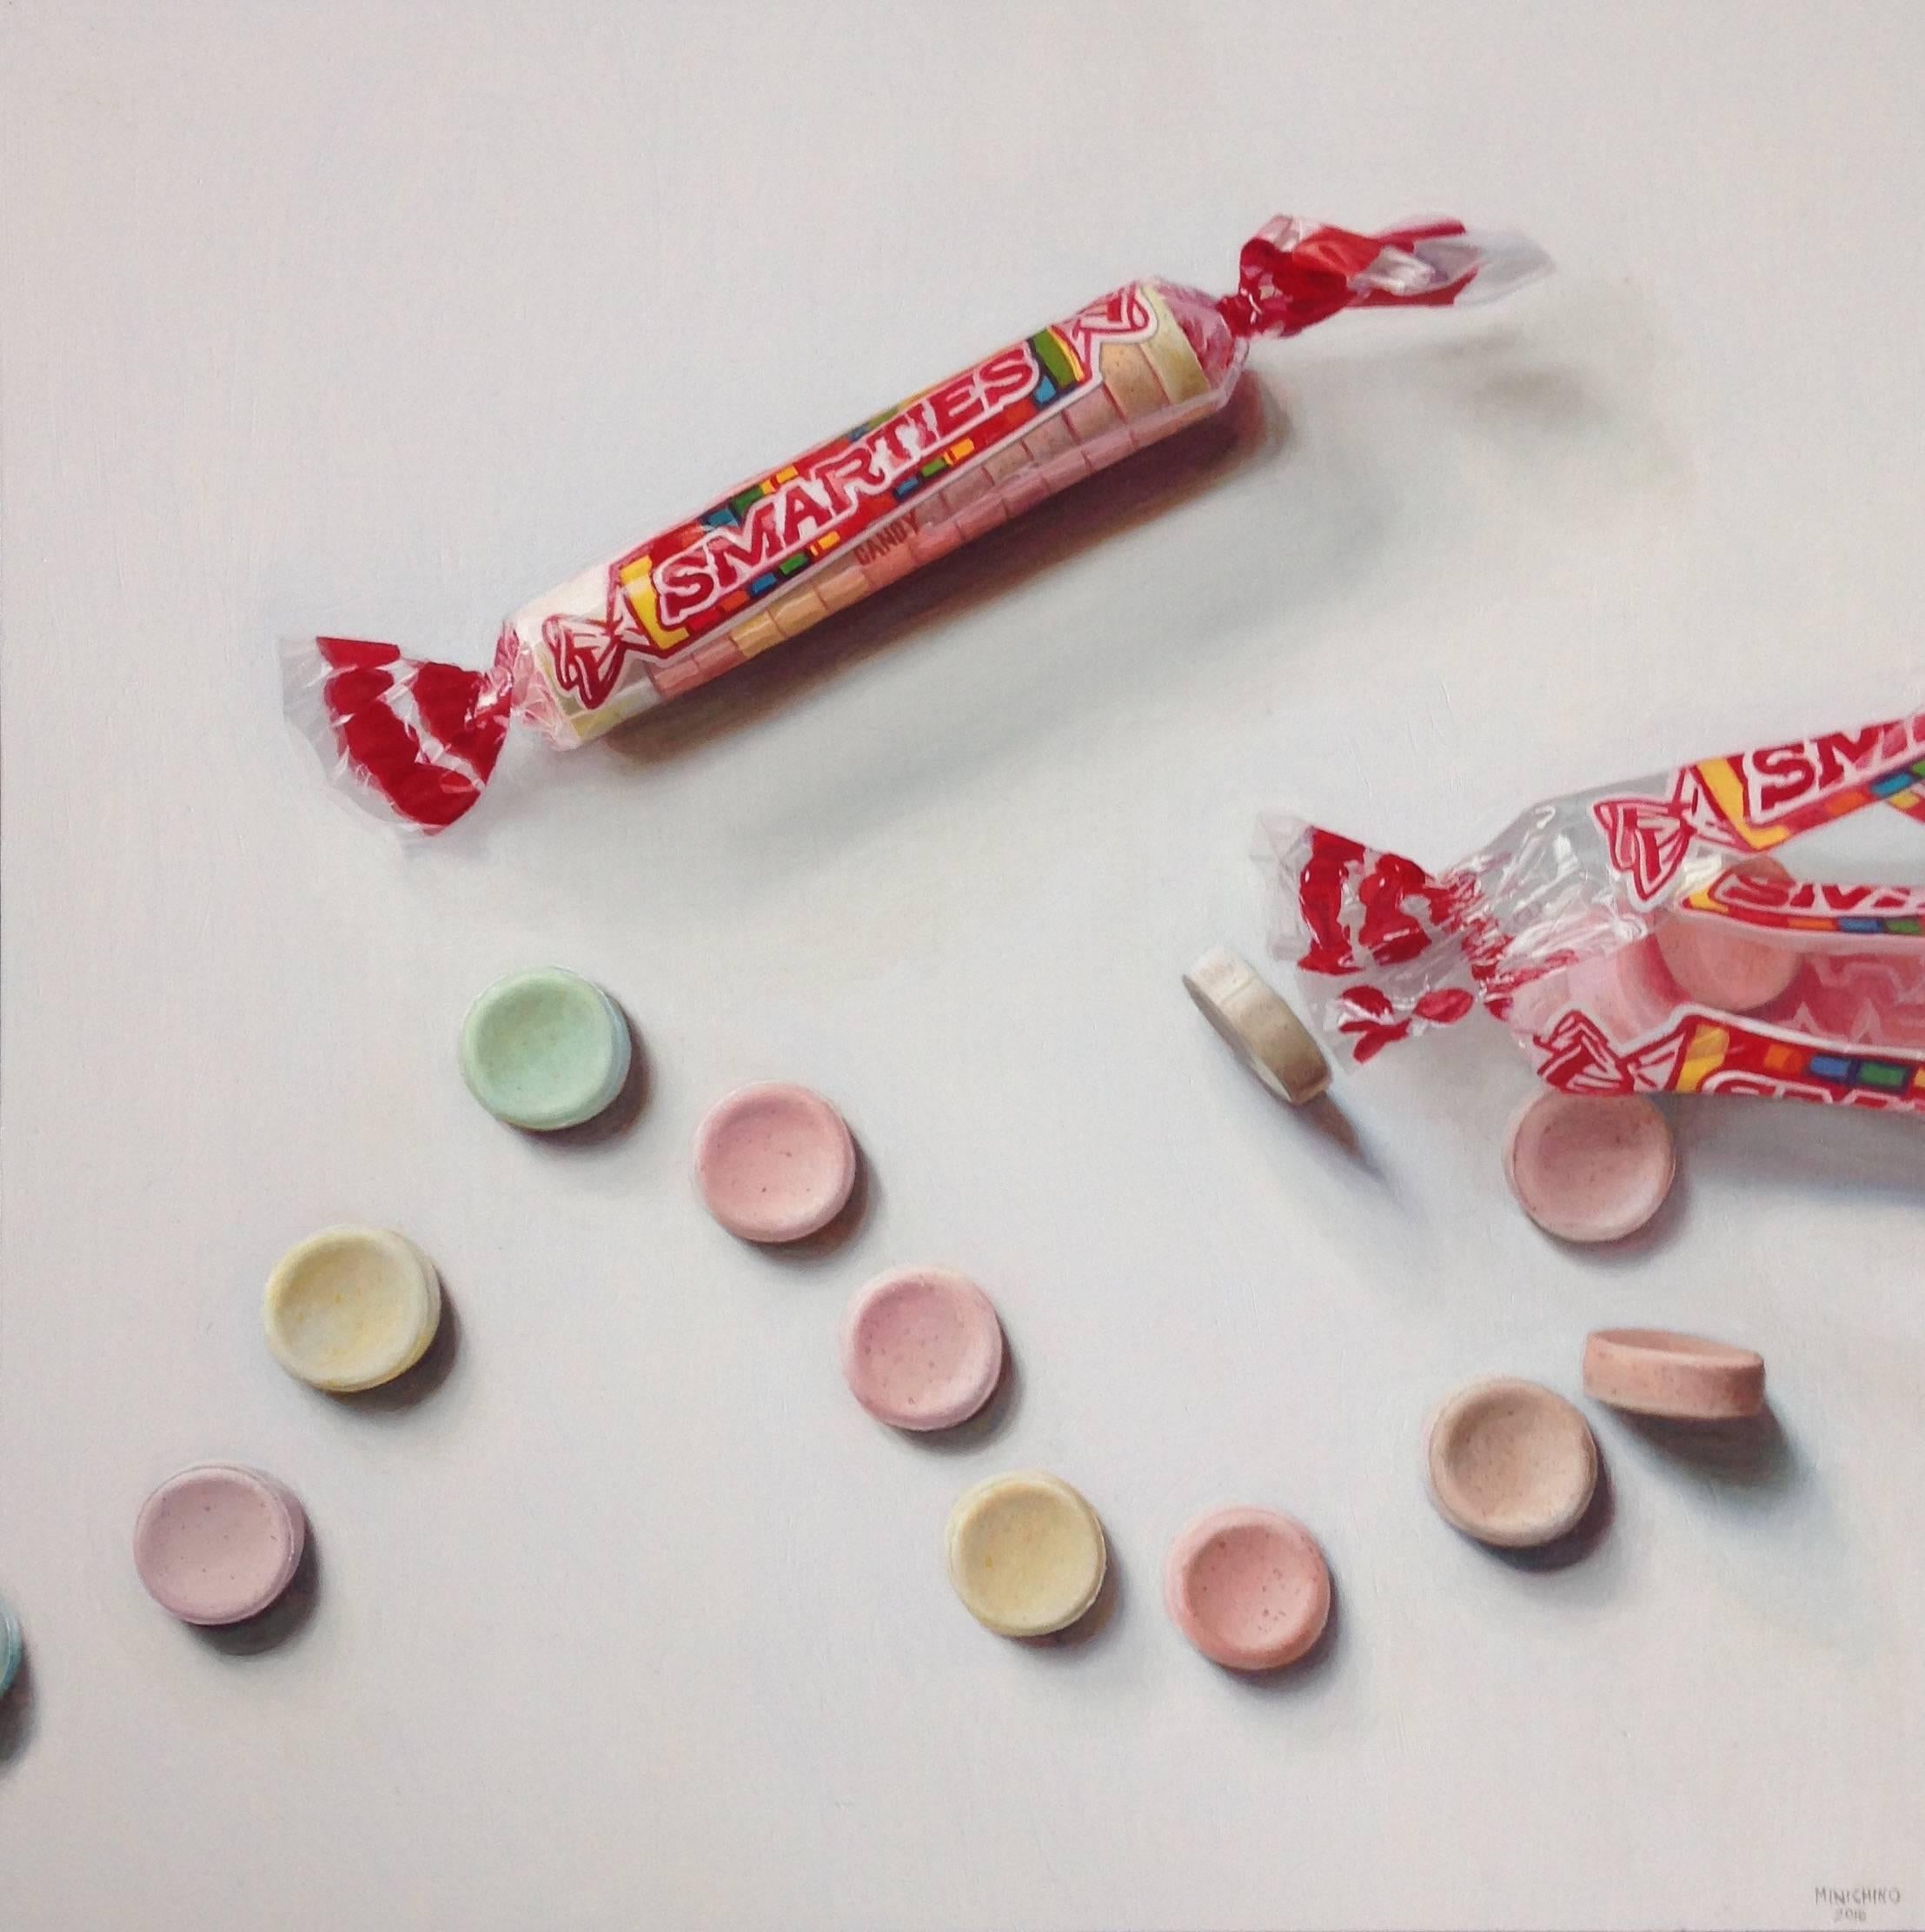 Marching Smarties